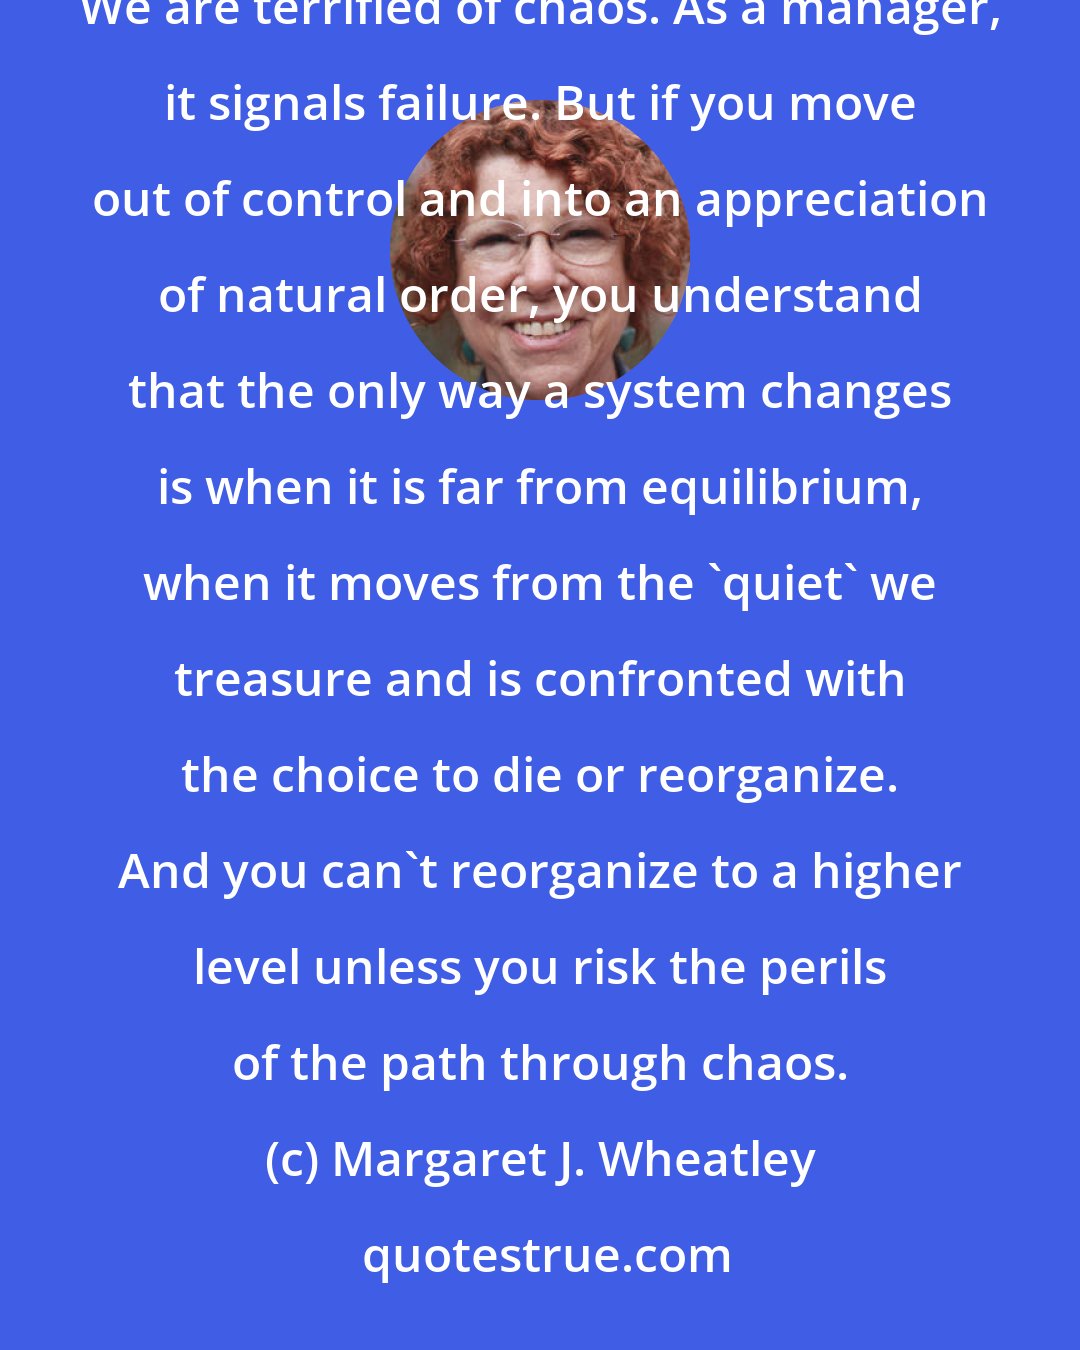 Margaret J. Wheatley: One of the great errors organizations make is shutting down what is a natural, life-enhancing process-chaos. We are terrified of chaos. As a manager, it signals failure. But if you move out of control and into an appreciation of natural order, you understand that the only way a system changes is when it is far from equilibrium, when it moves from the 'quiet' we treasure and is confronted with the choice to die or reorganize. And you can't reorganize to a higher level unless you risk the perils of the path through chaos.